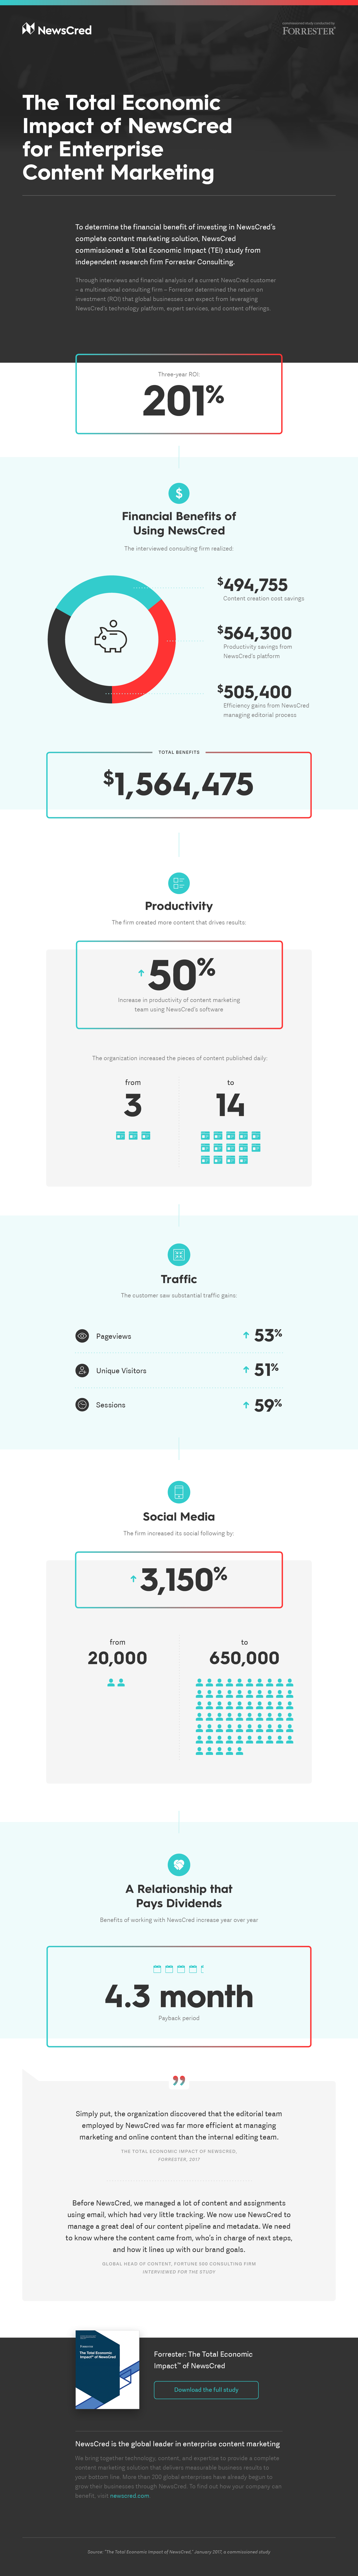 tei-infographic-inline-no-links-r3.png